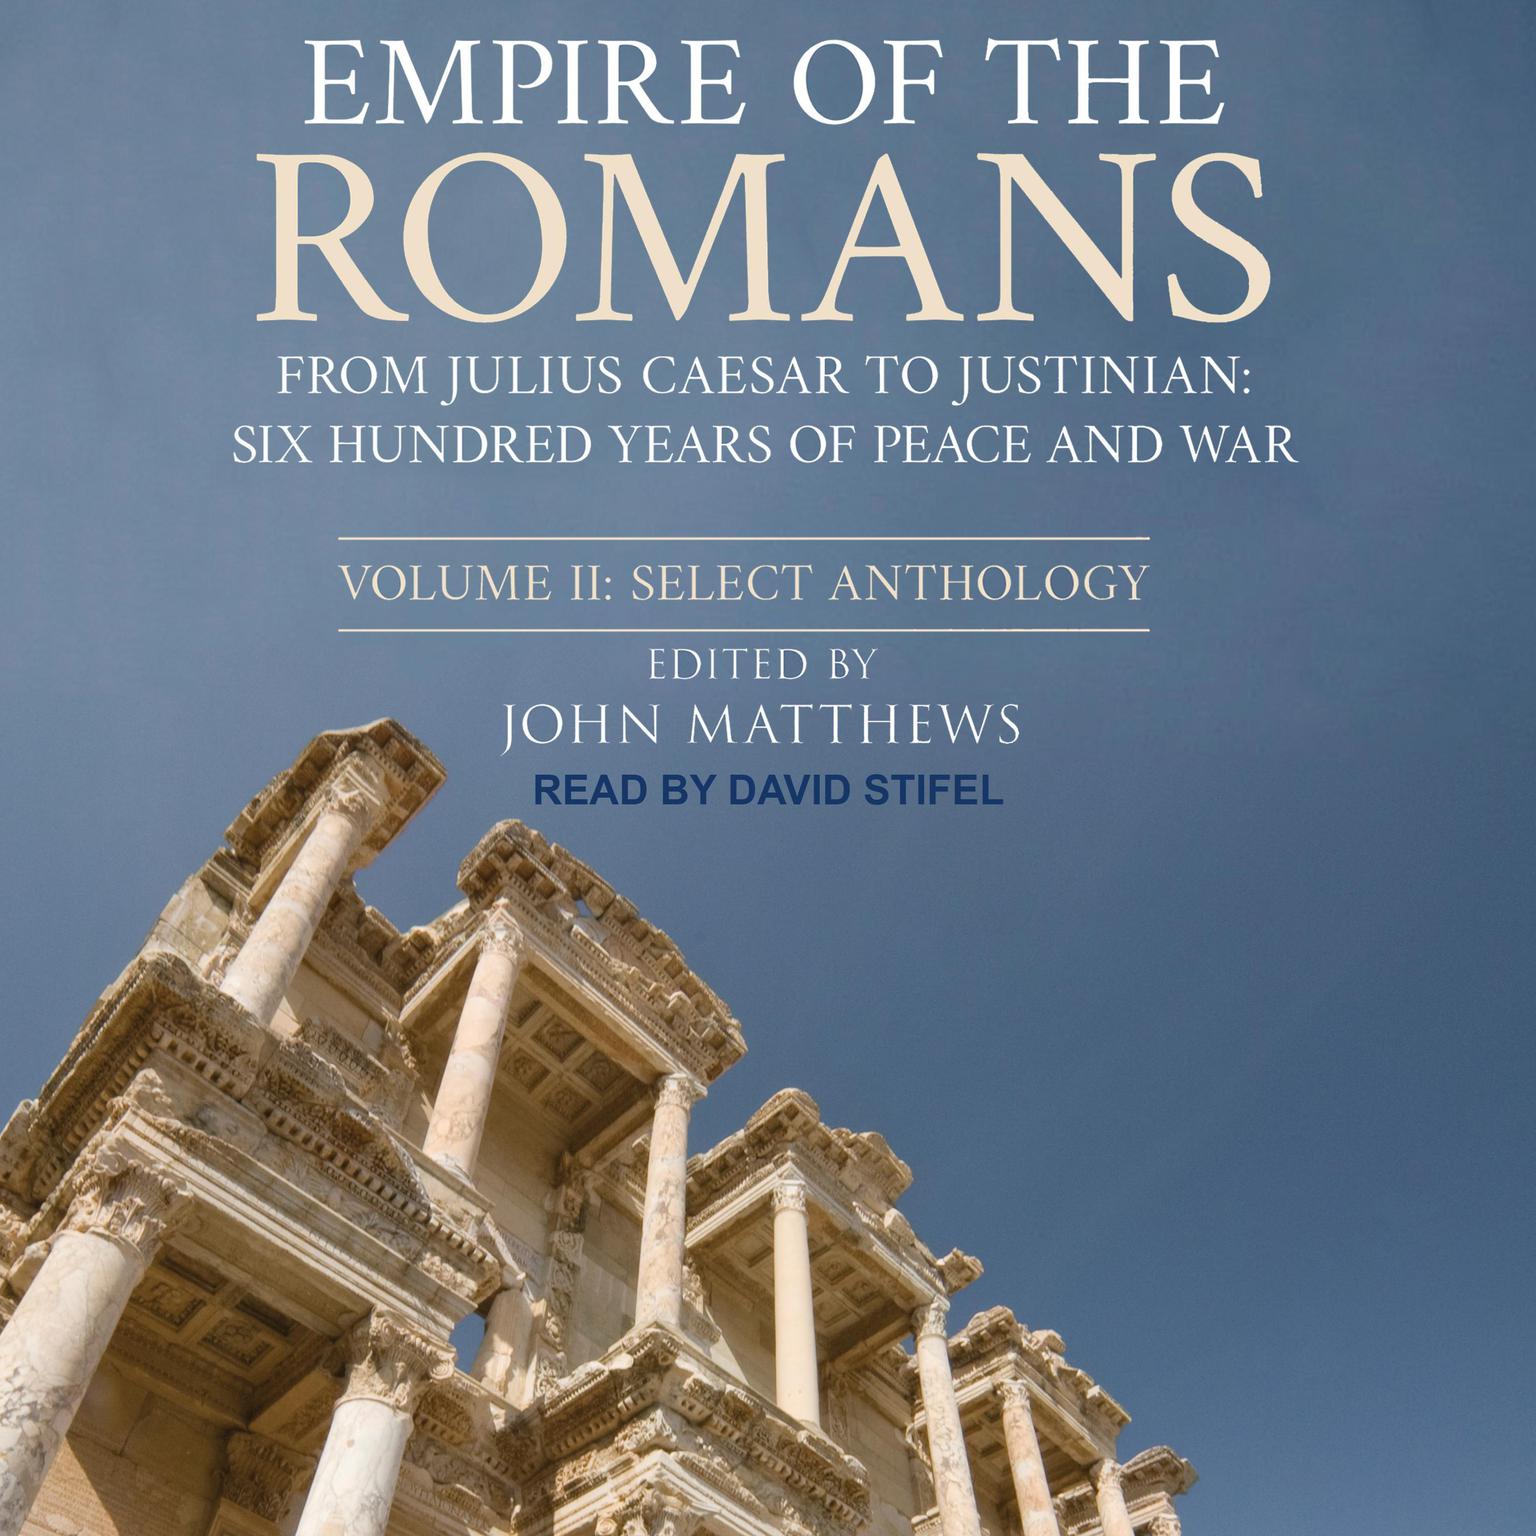 Empire of the Romans (Abridged): From Julius Caesar to Justinian: Six Hundred Years of Peace and War, Volume II: Select Anthology Audiobook, by John Matthews